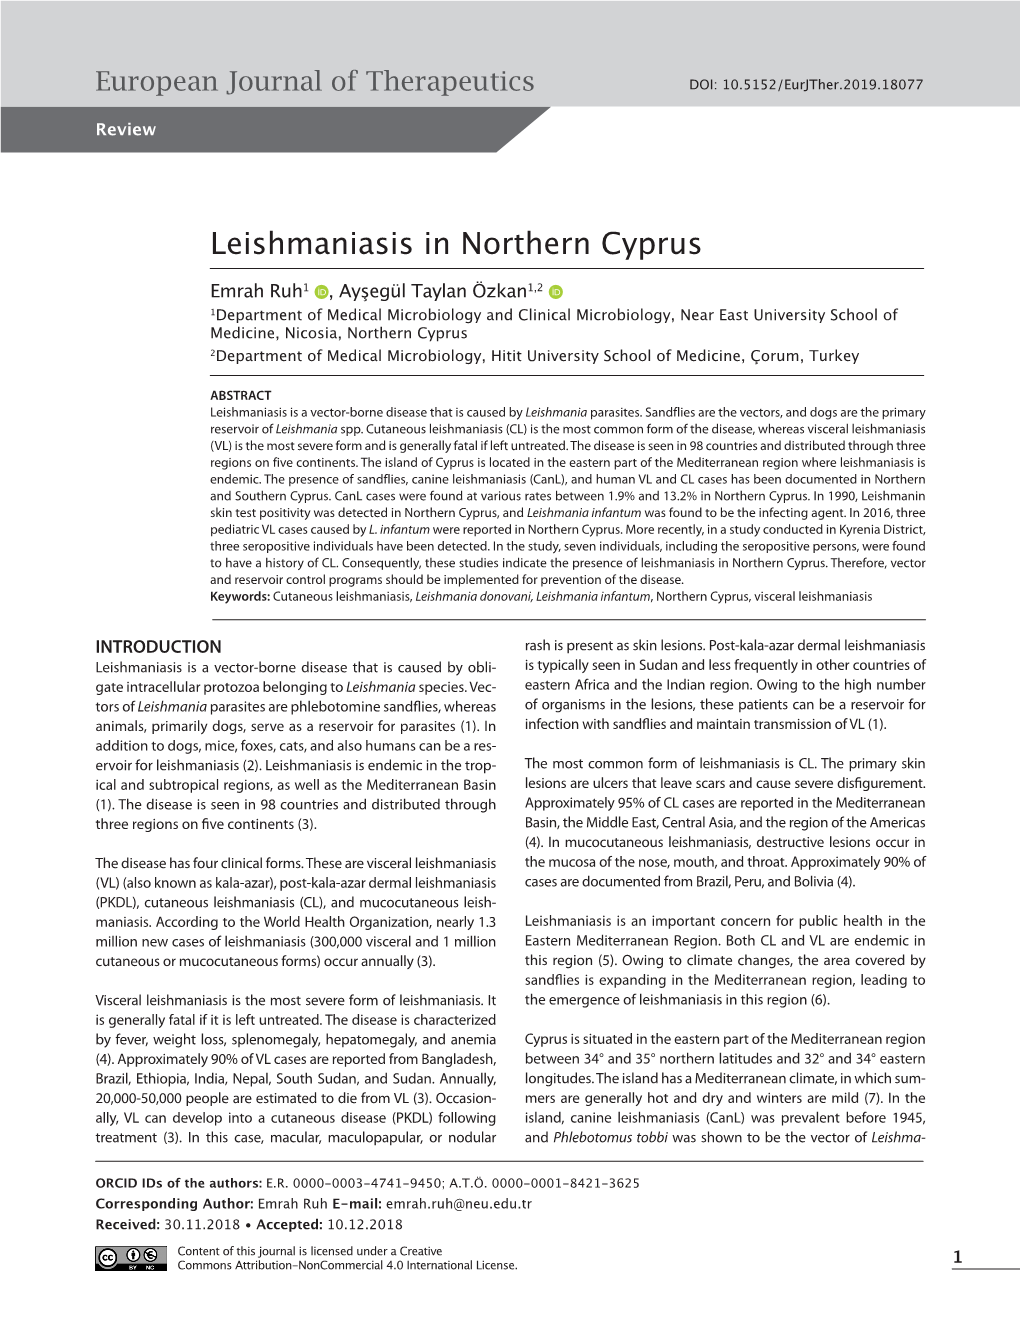 Leishmaniasis in Northern Cyprus